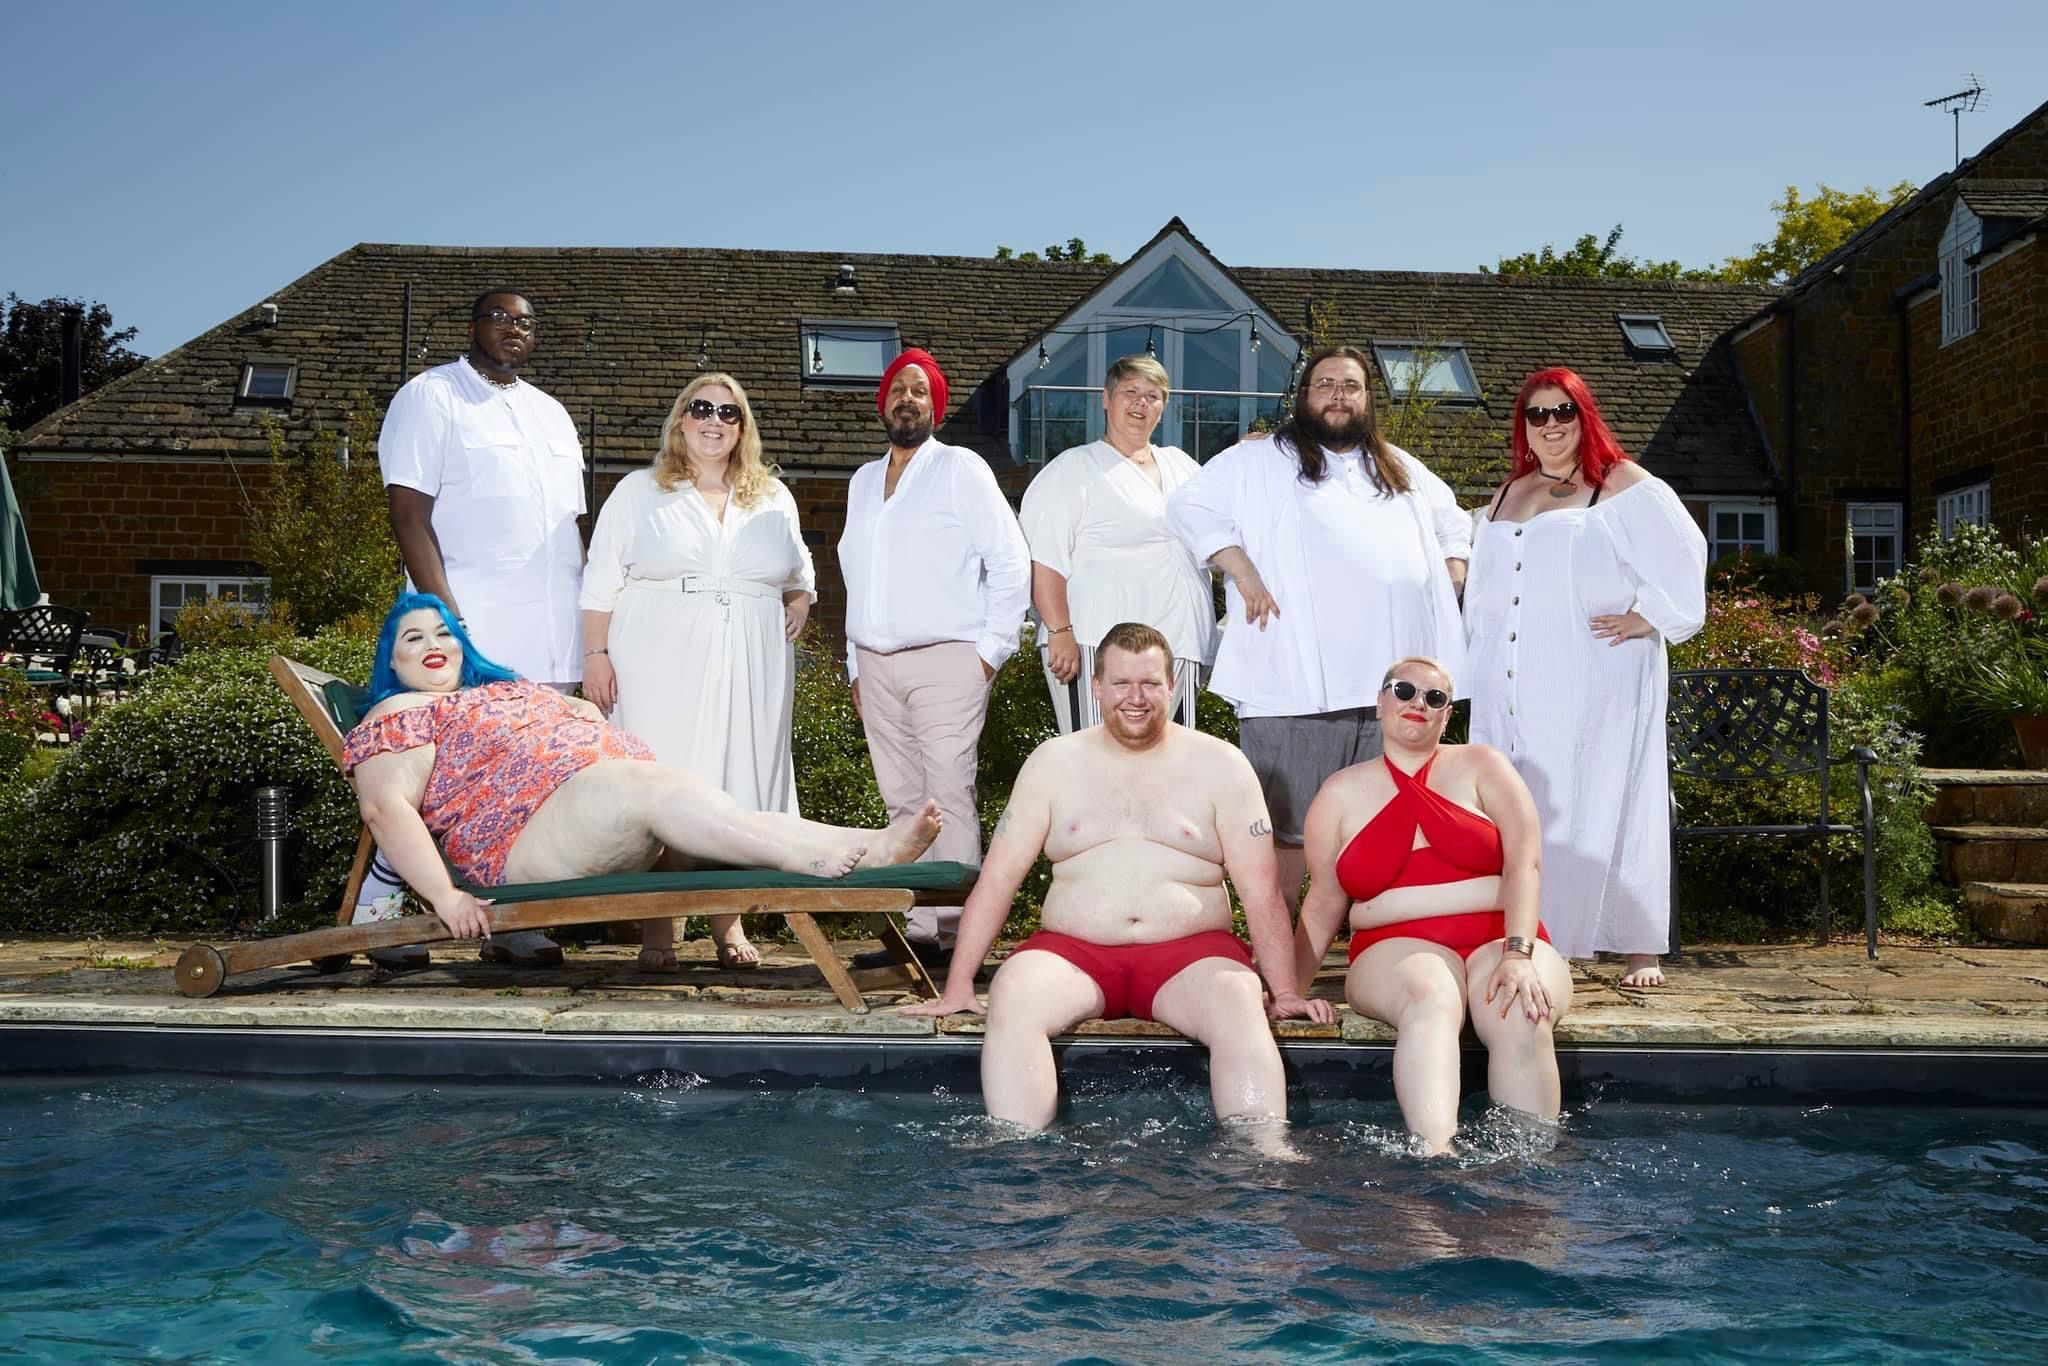 A group of obese people posing for a picture by a pool